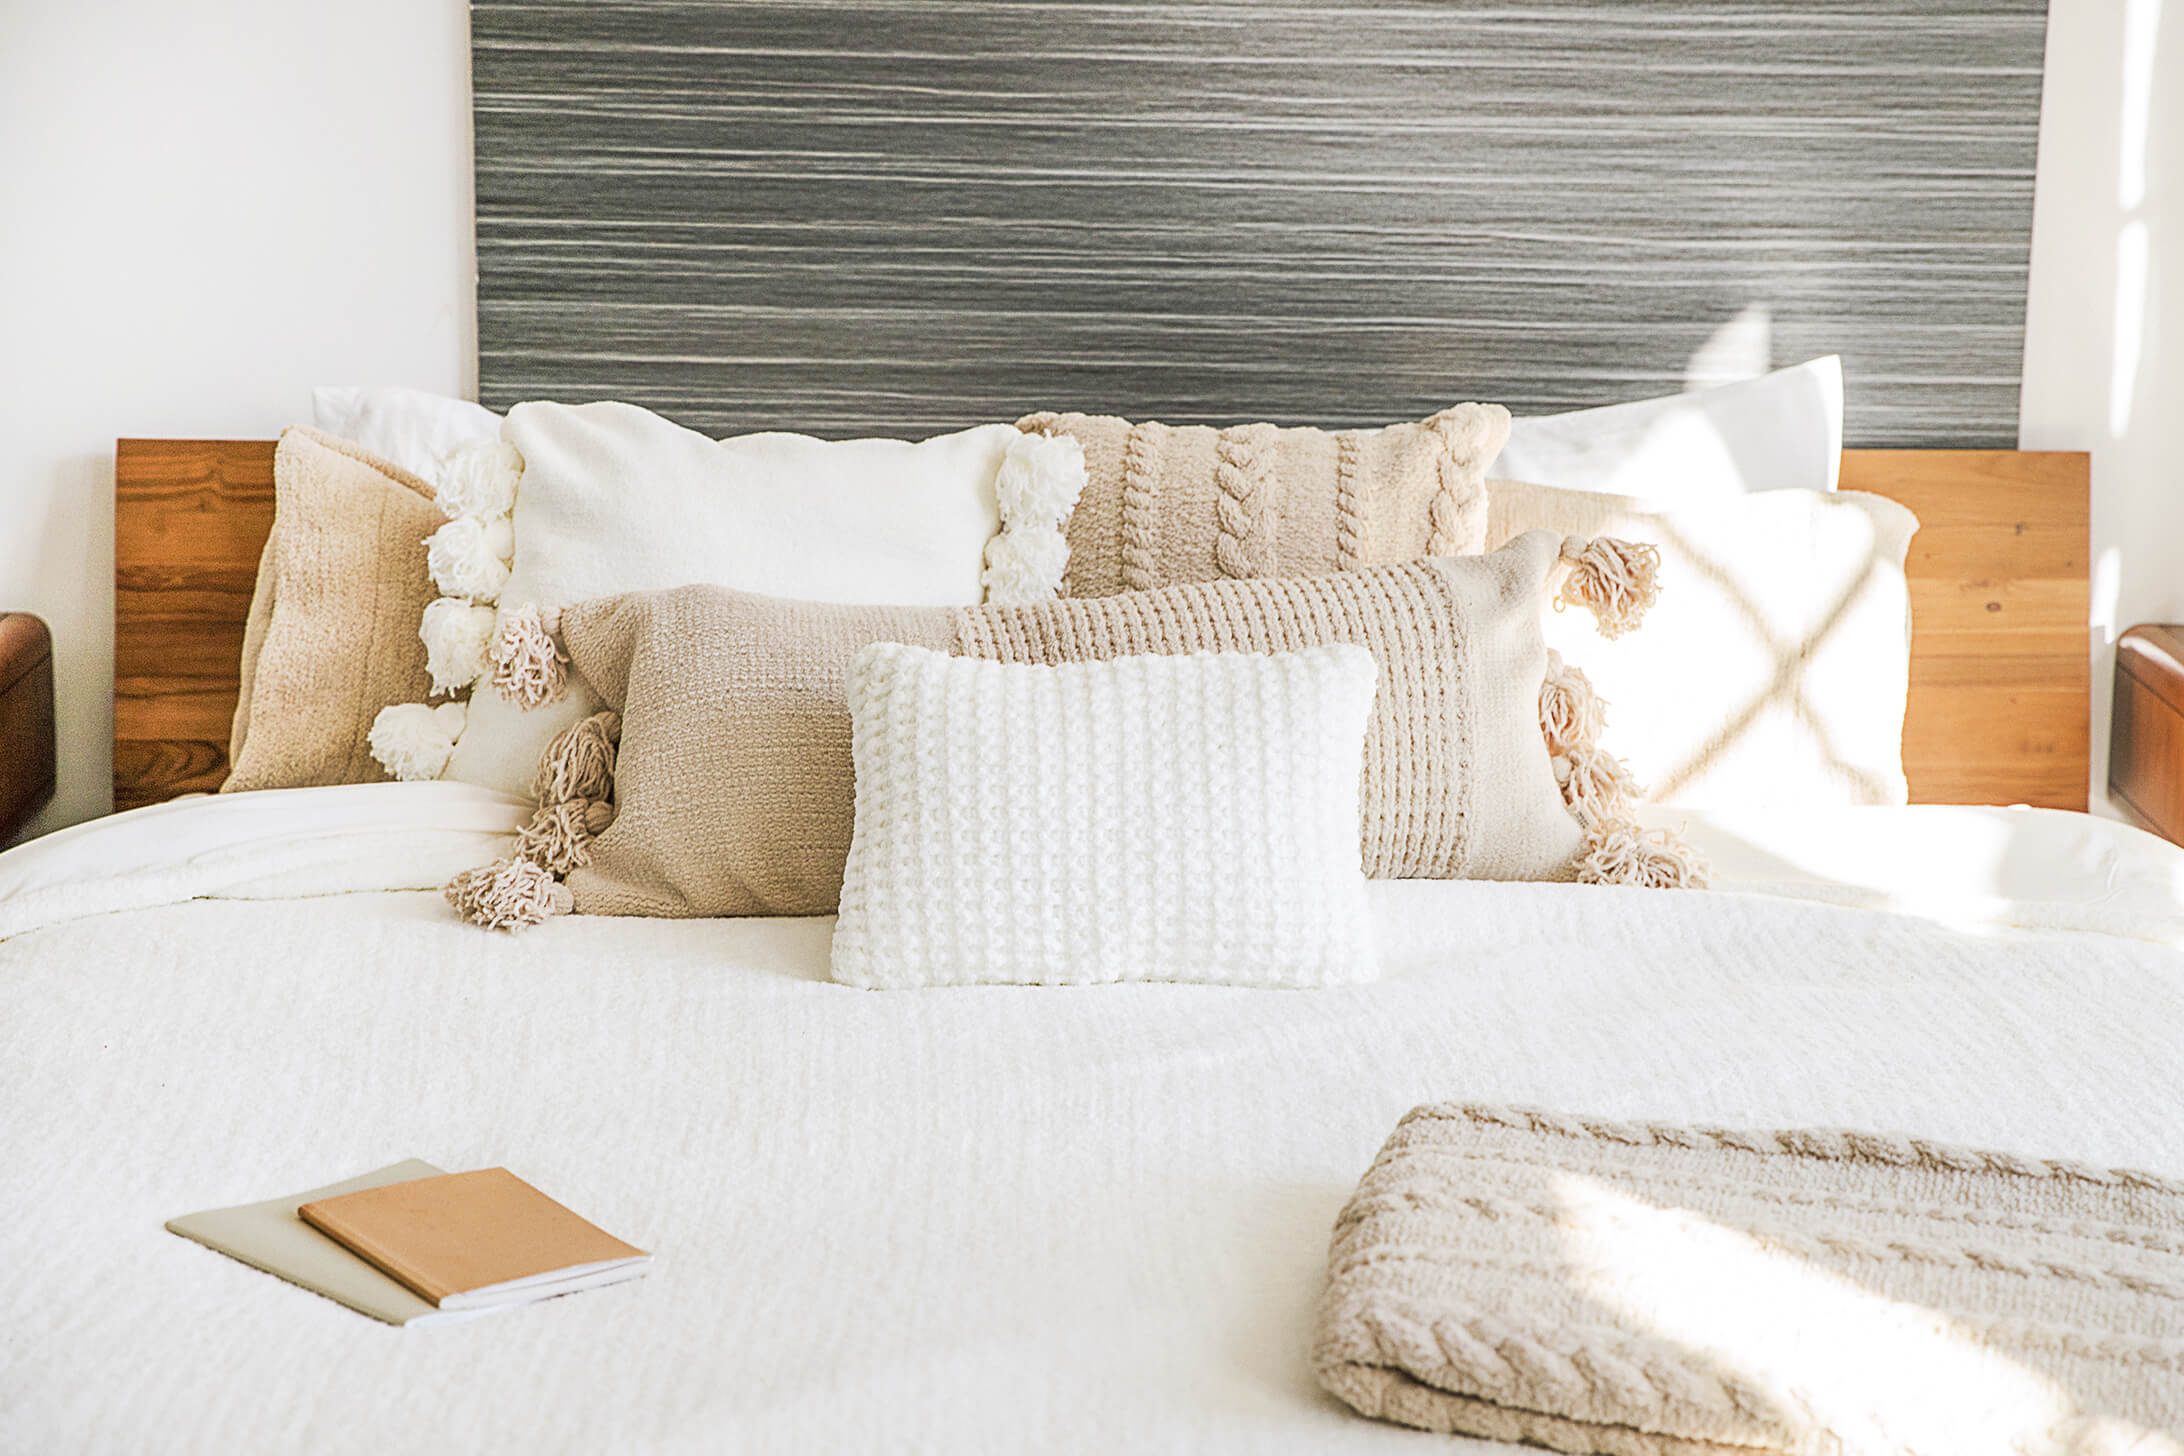 Neutral and cozy bed. White and tan bedding and pillows. White and beige bedding and pillows. Neutral cozy bed inspo. Neutral soft bedding.